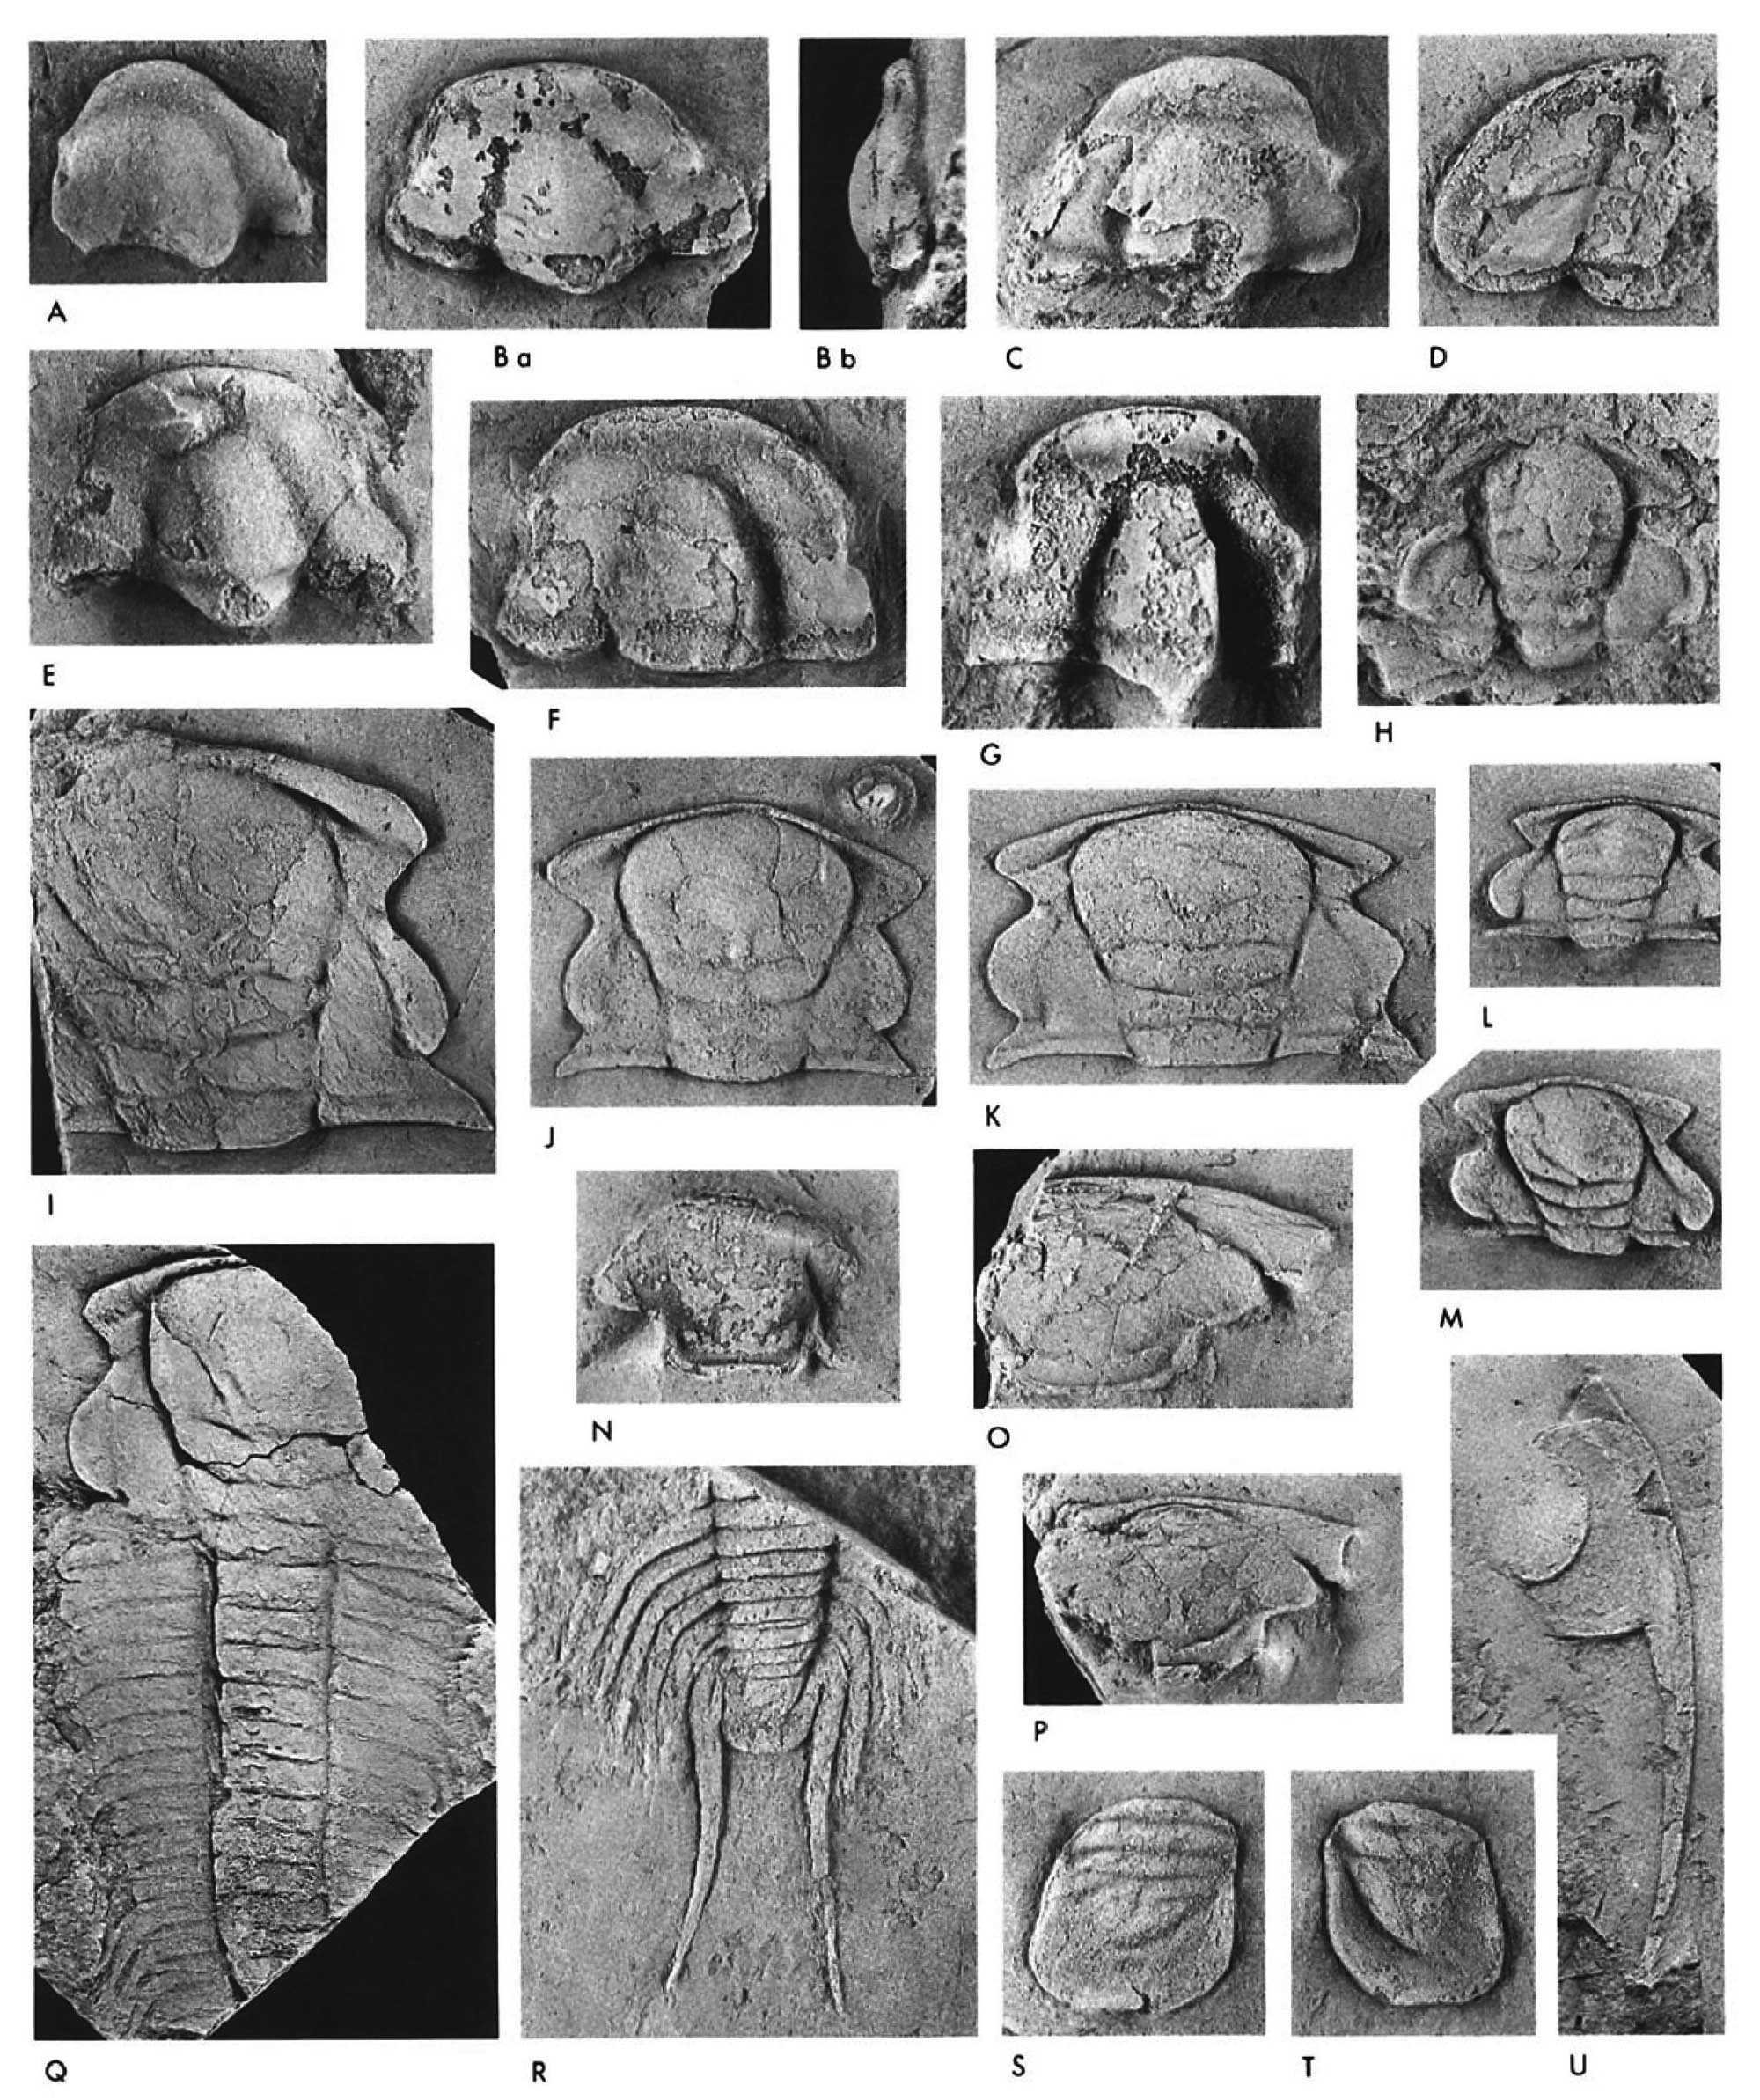 Plate of photographs of Cambrian trilobites from the Ashbill Pond Formation of the Carolina slate belt.